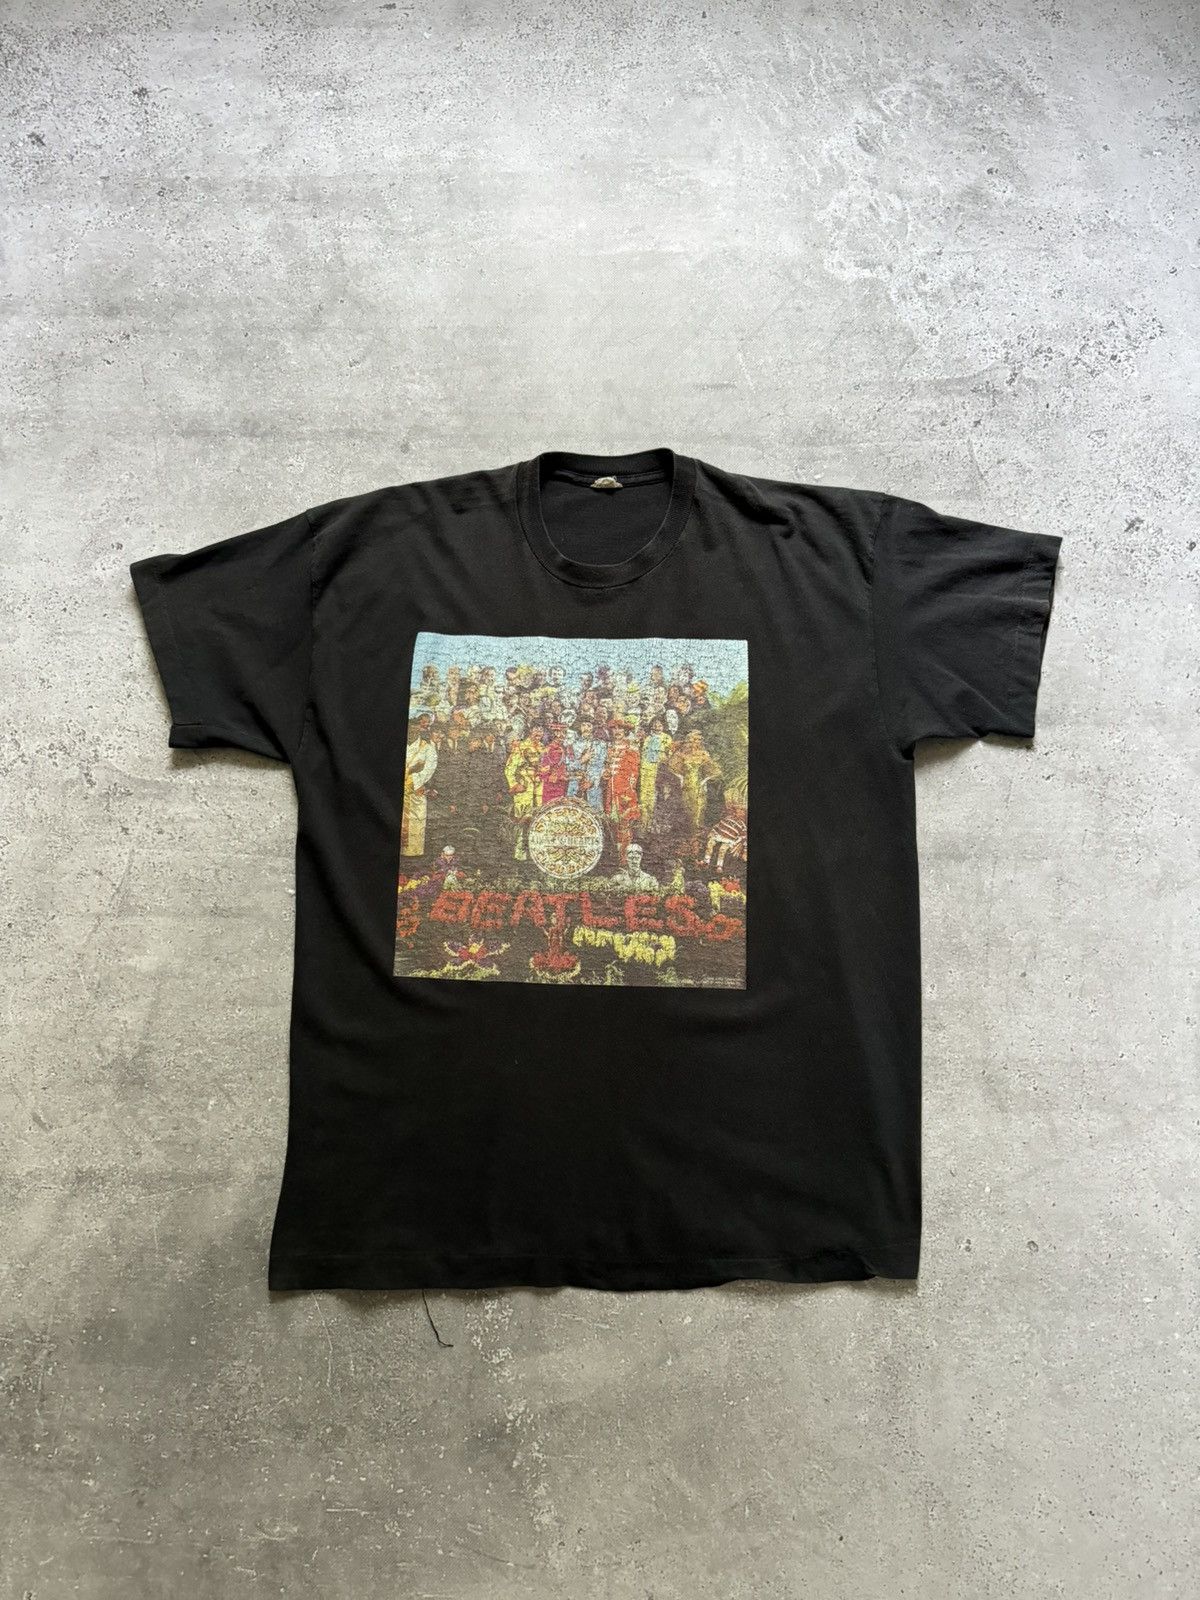 Pre-owned Band Tees X Rock Band Vintage 1996 The Beatles Sgt.peppers Lonely Hearts Band Tee In Black